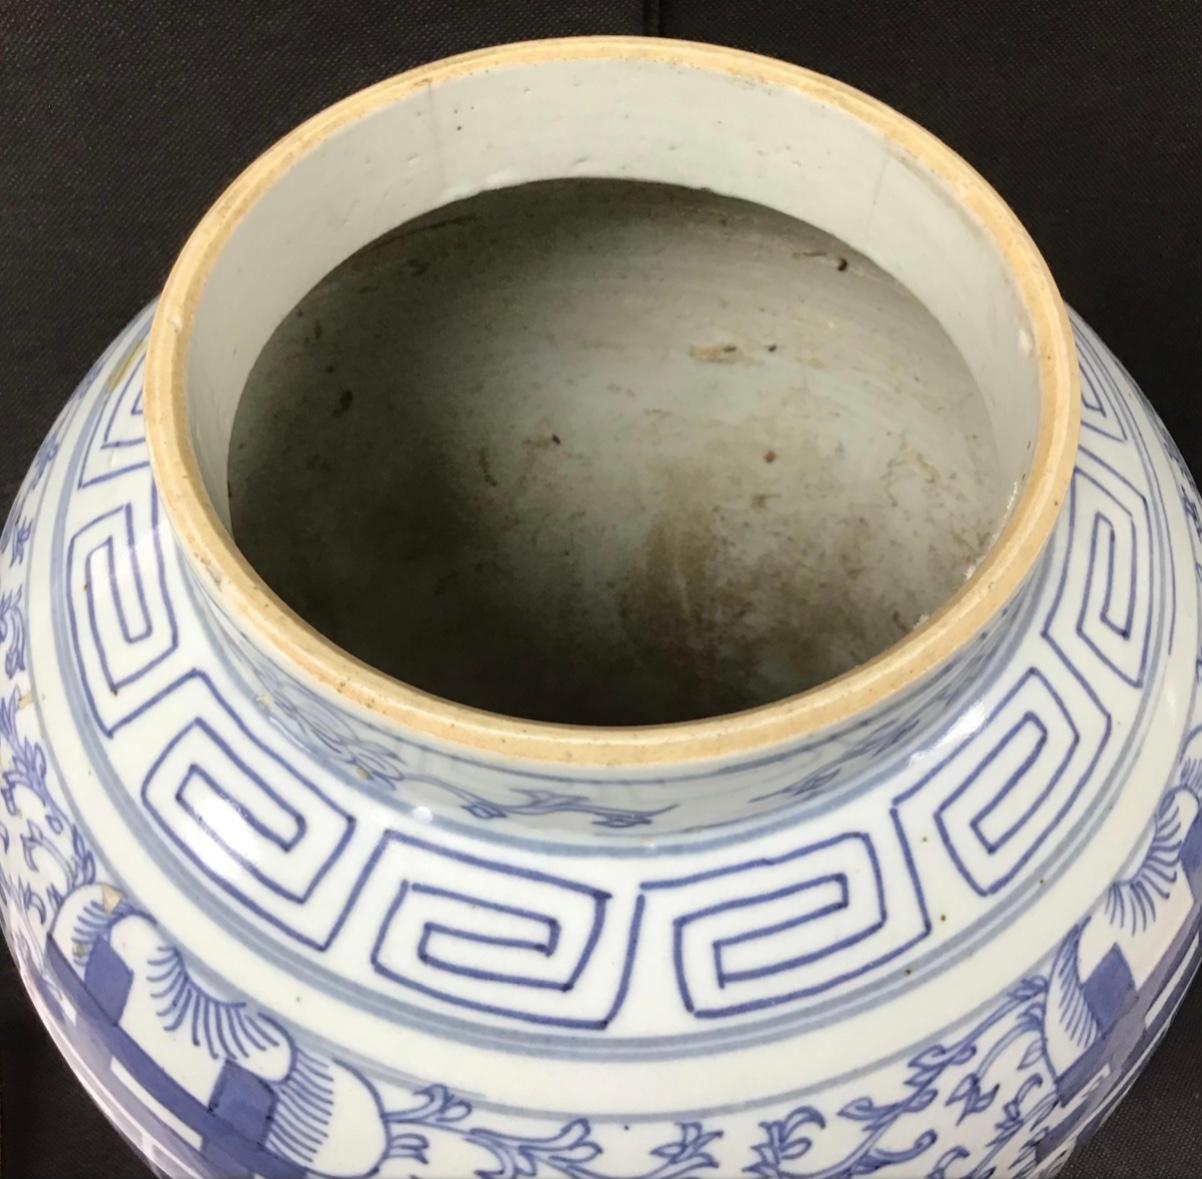 This blue-and-white temple jar stands tall with broad shoulders that taper to a splayed base. Bordered by a simple meander at the neck, the jar is decorated with a dense pattern of orchid blossoms and trailing vines. On each side of the jar, the